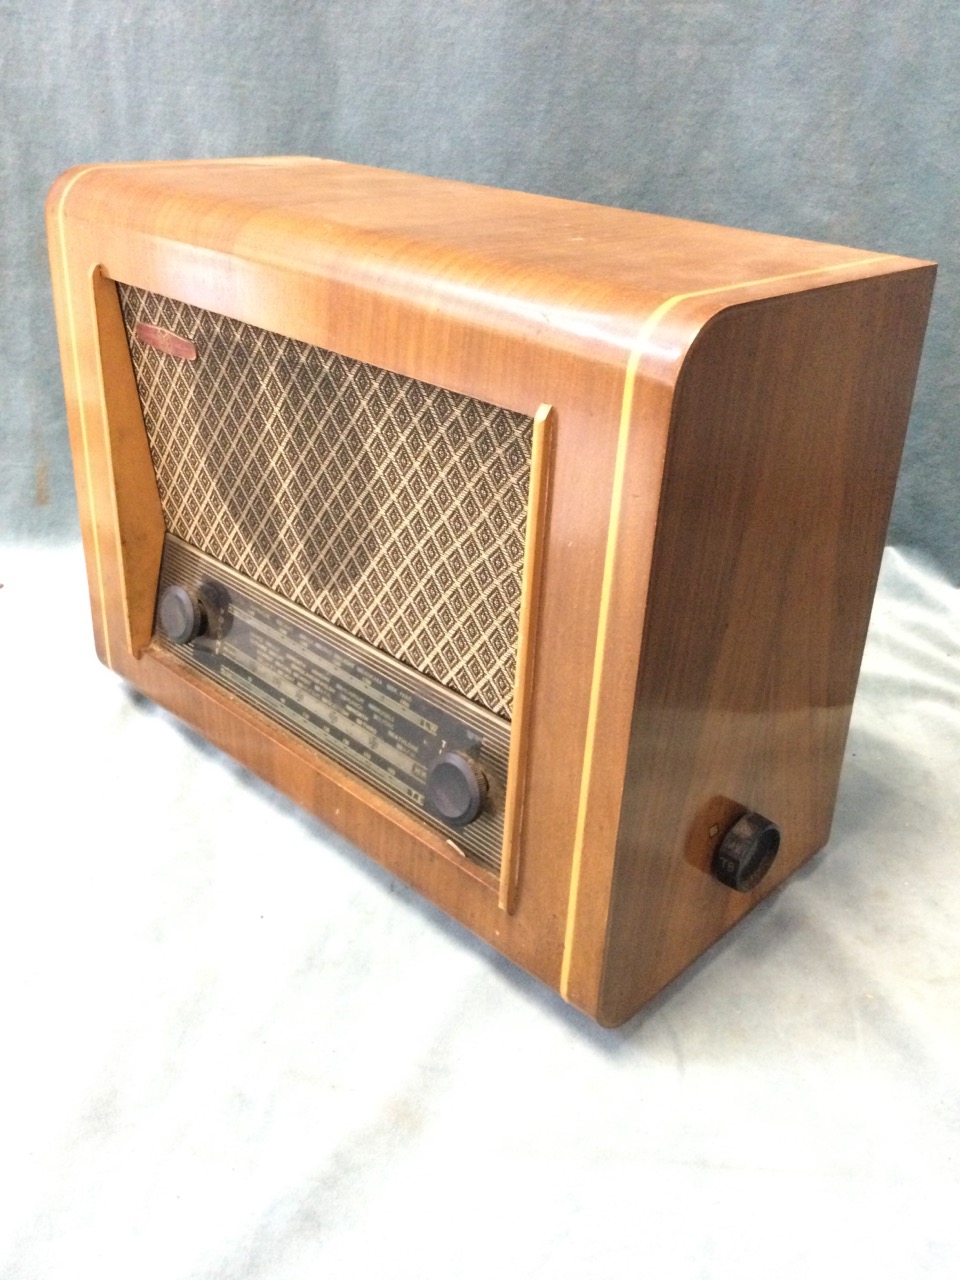 A 50s walnut cased Pye valve radio - model P75T with glass dial beneath fabric covered speaker, - Image 3 of 3